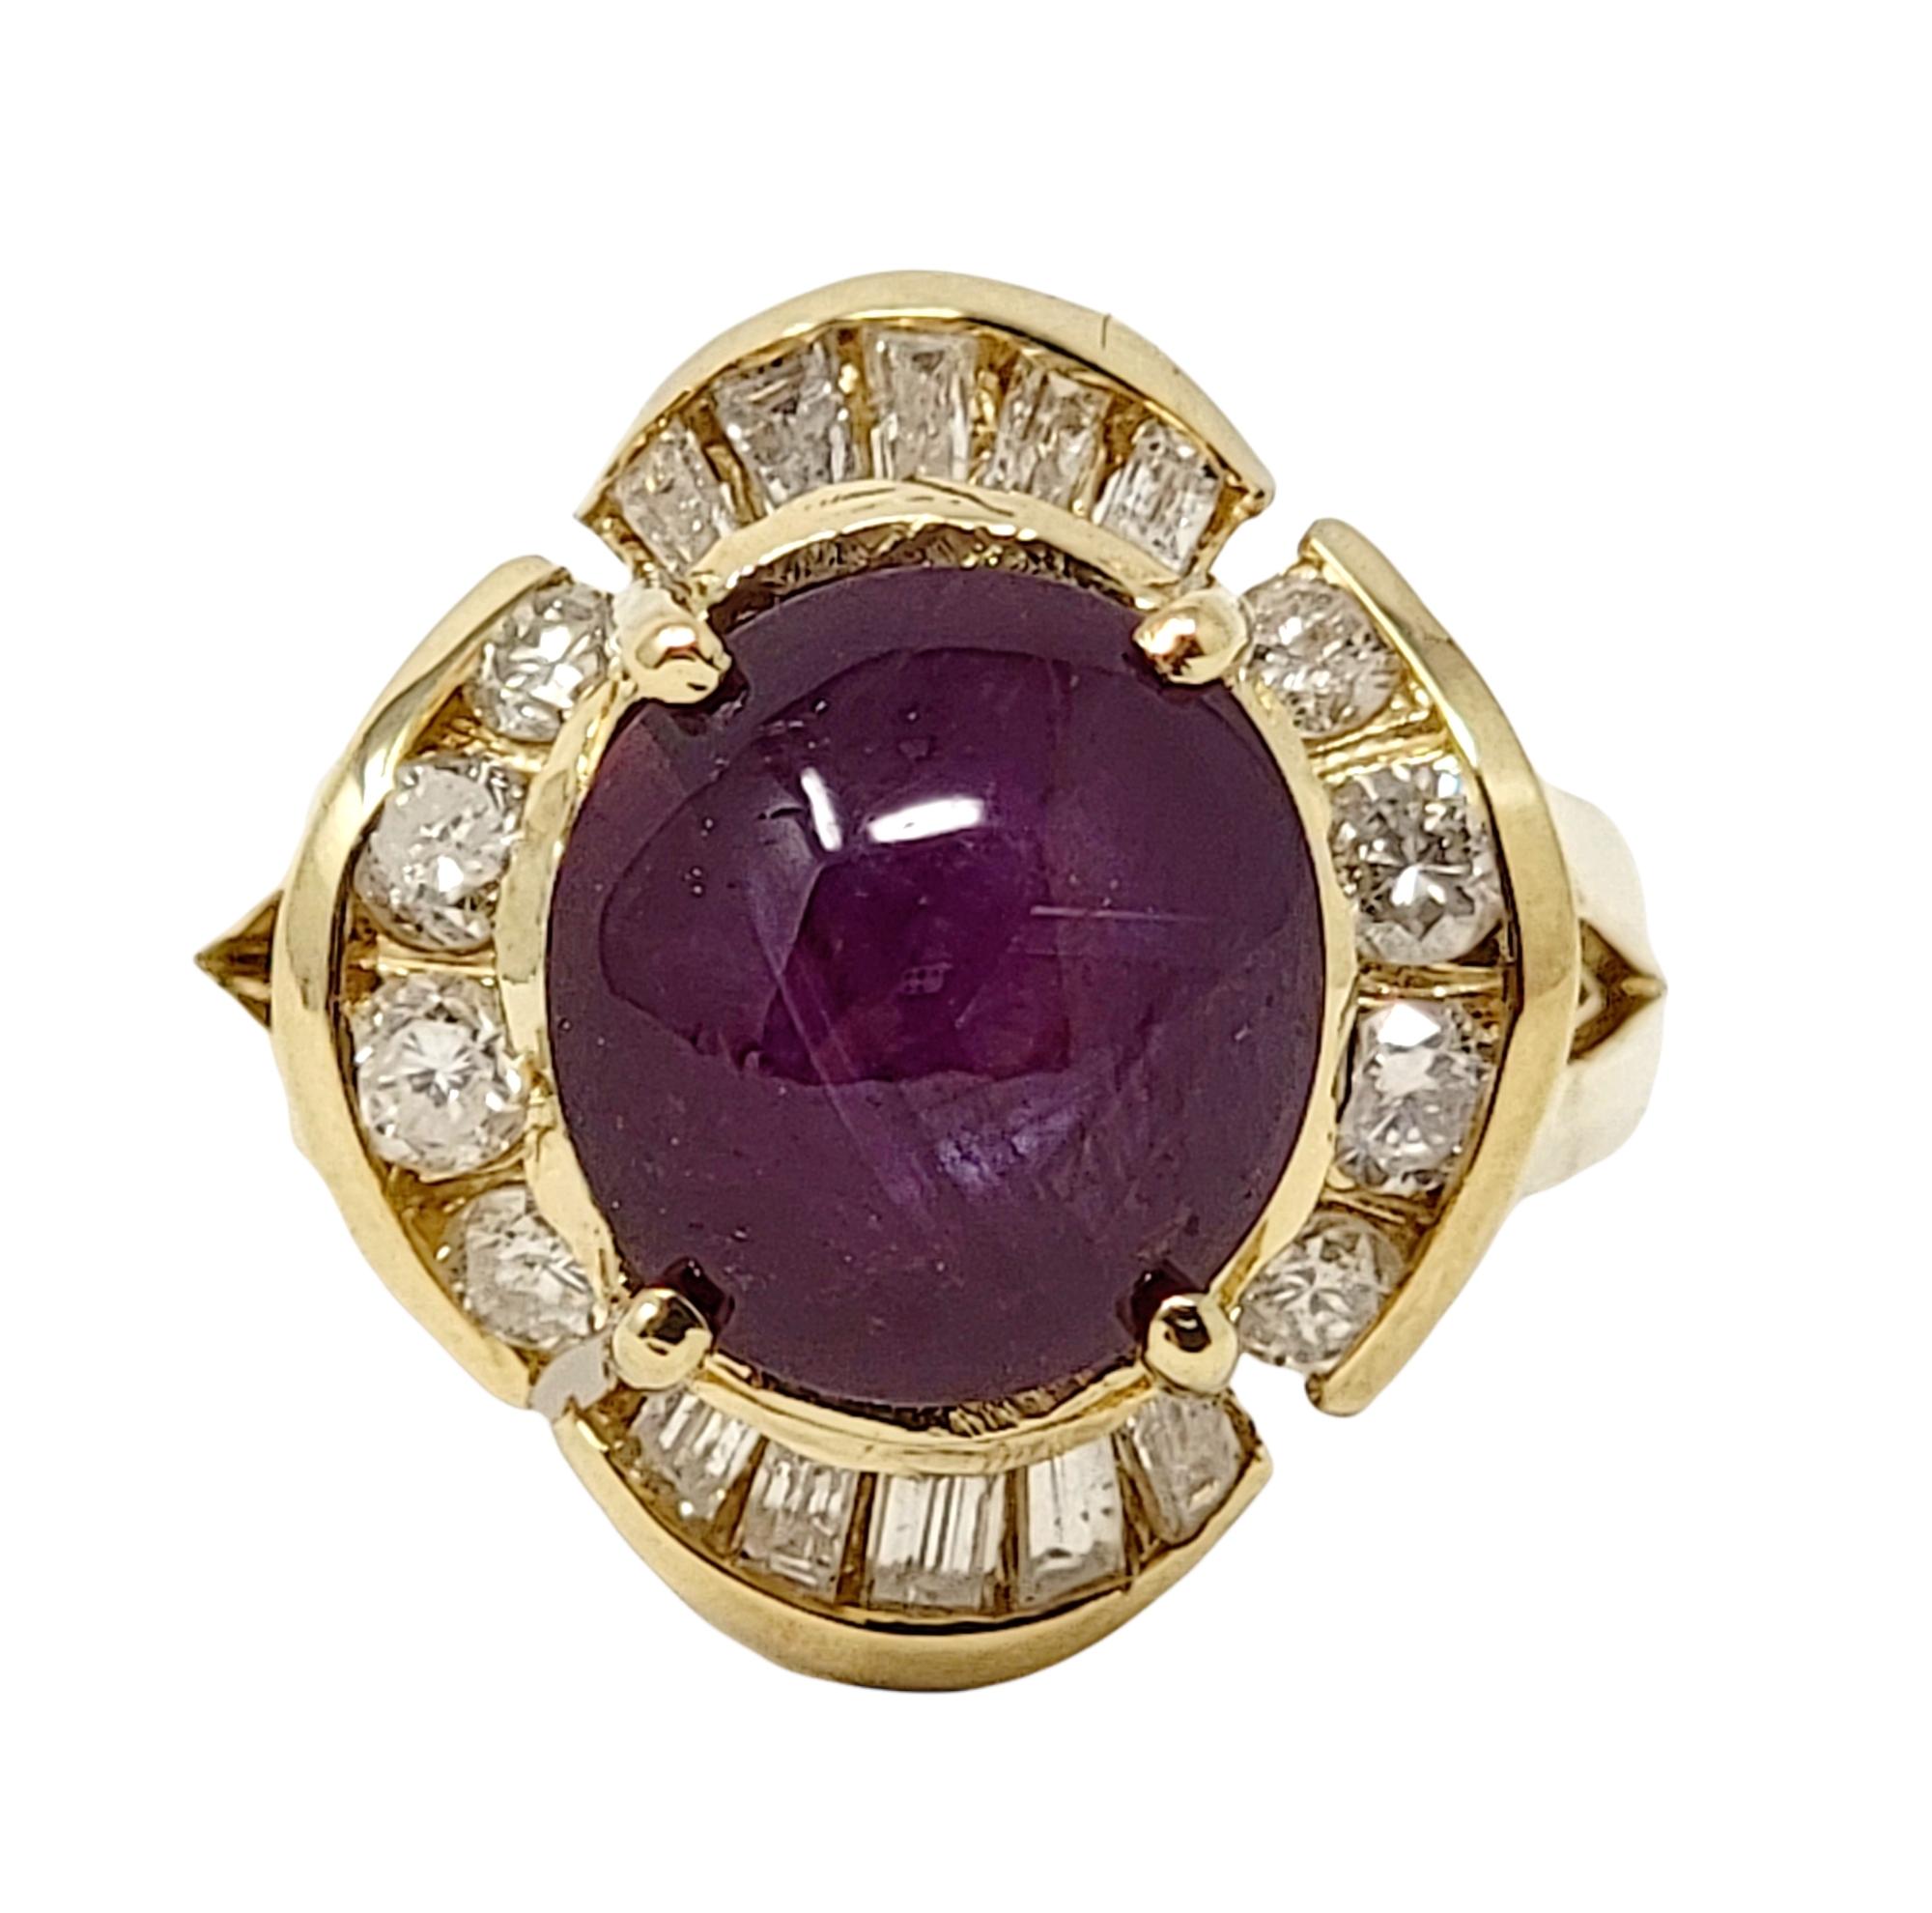 Ring size: 6

Stunning and unique star ruby and diamond cocktail ring. This gorgeous piece features a single 9.08 carat oval cabochon star ruby stone prong set at the center of the piece. Surrounding the incredible purplish-red stone is a curved